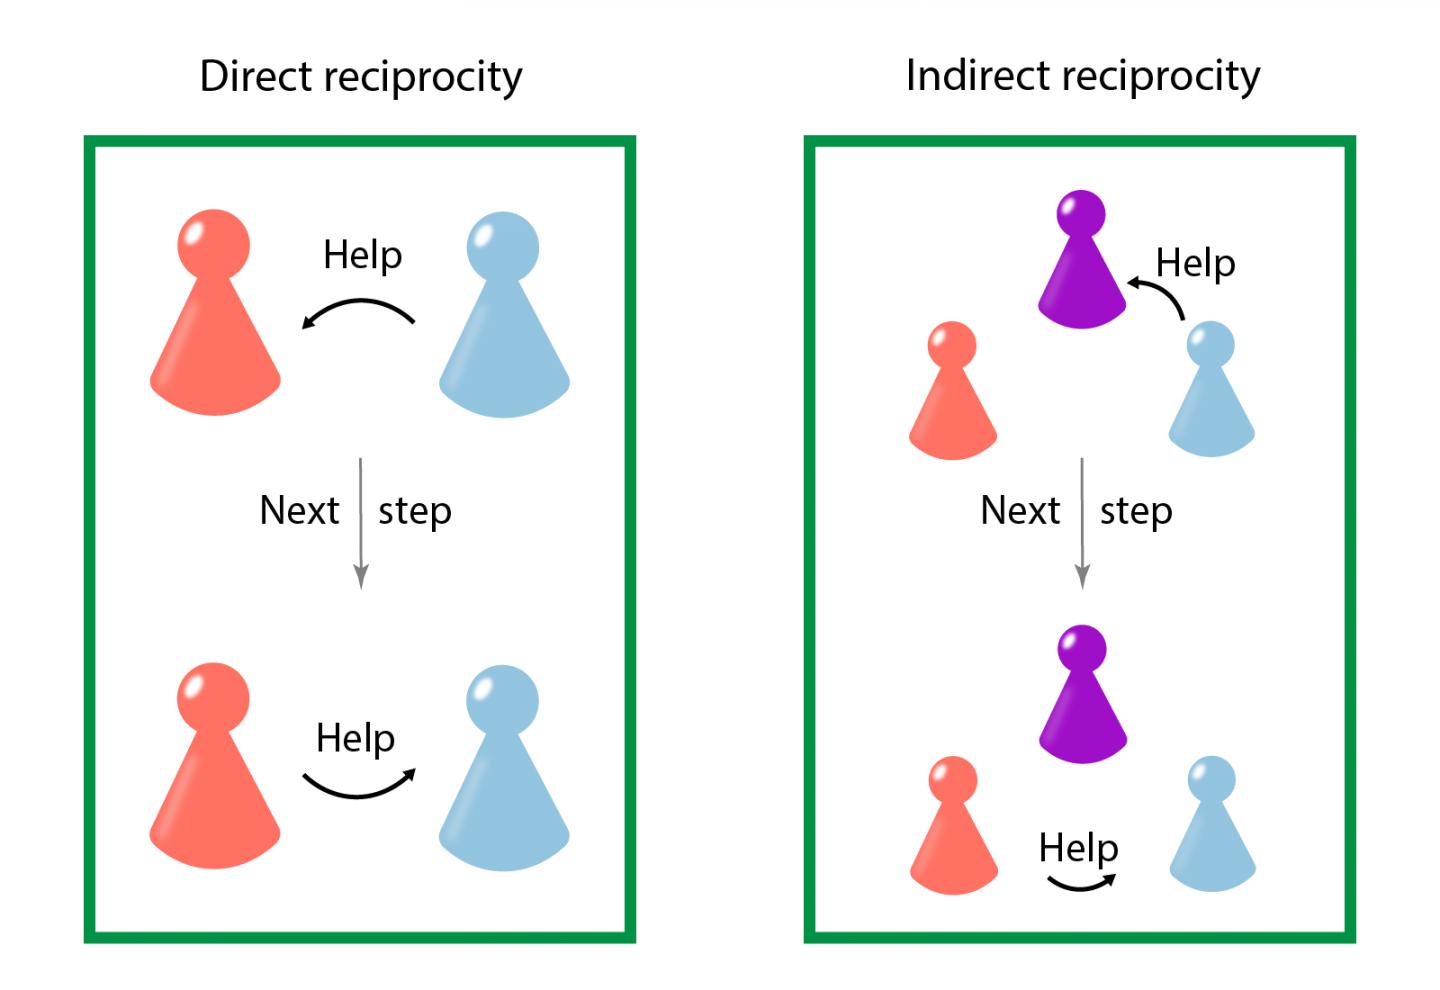 Illustration of direct and indirect reciprocity